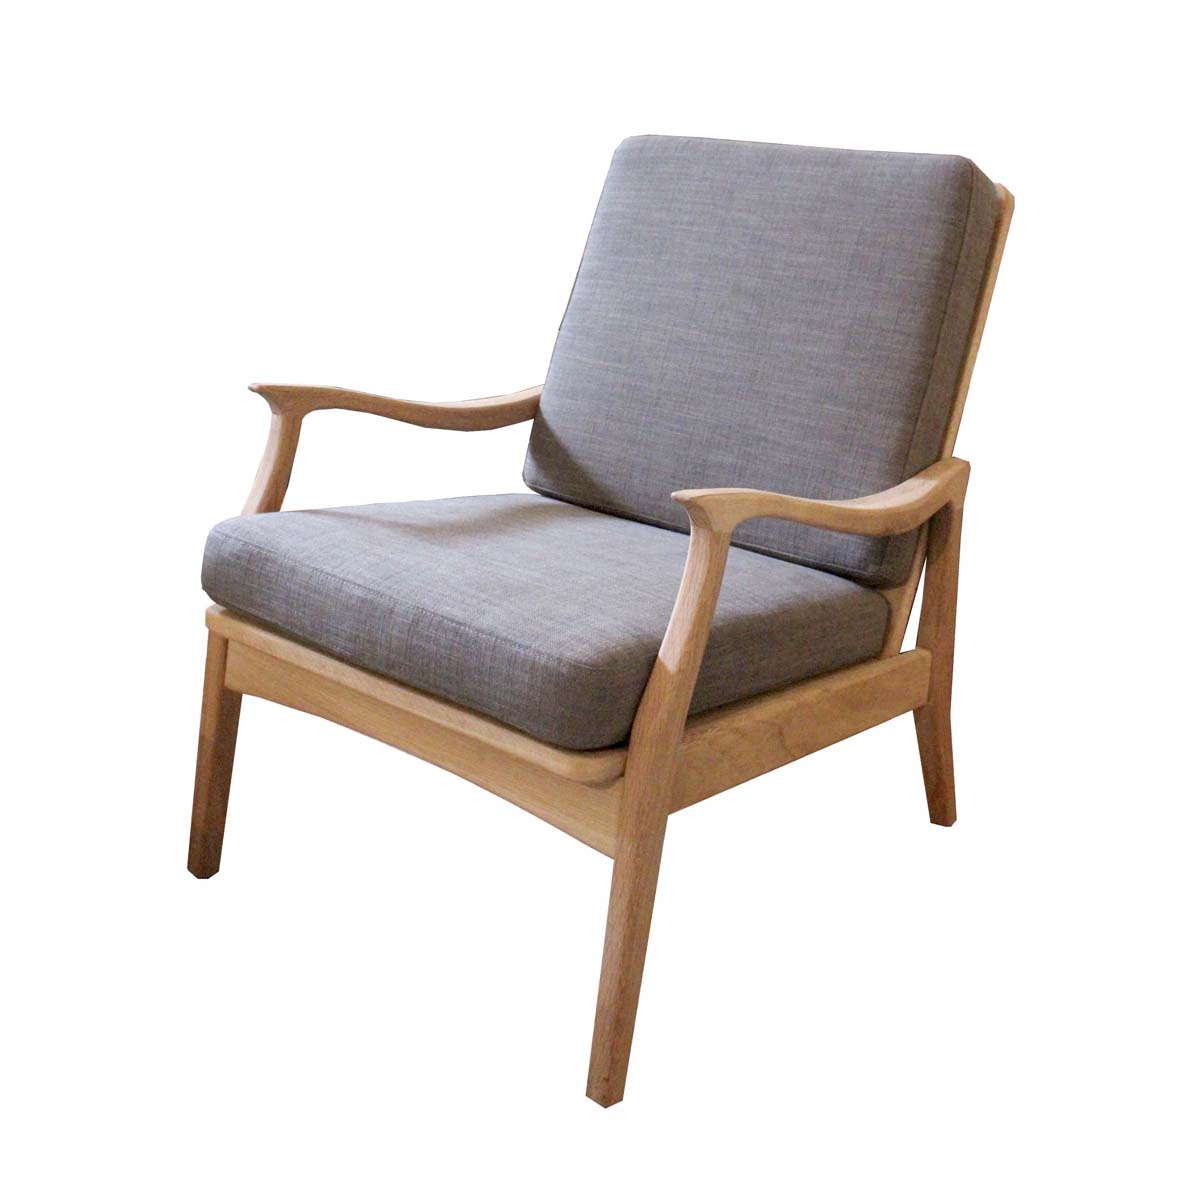 Scandinavian style chair with upholstered loose cushions on oak frame